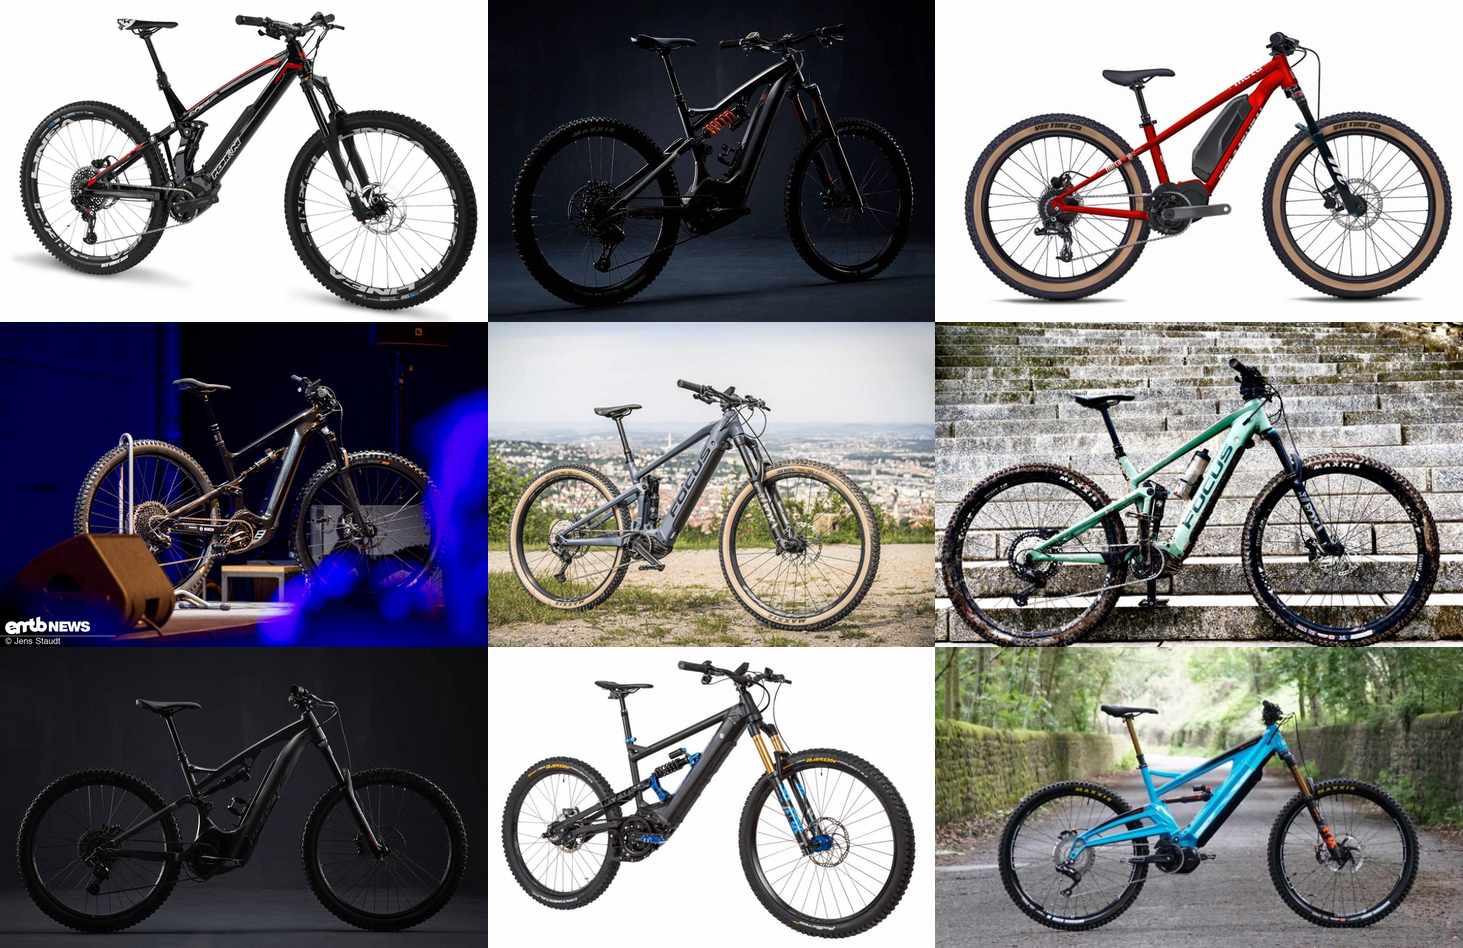 9 new e-Bikes announced this week, when will we see number 10?